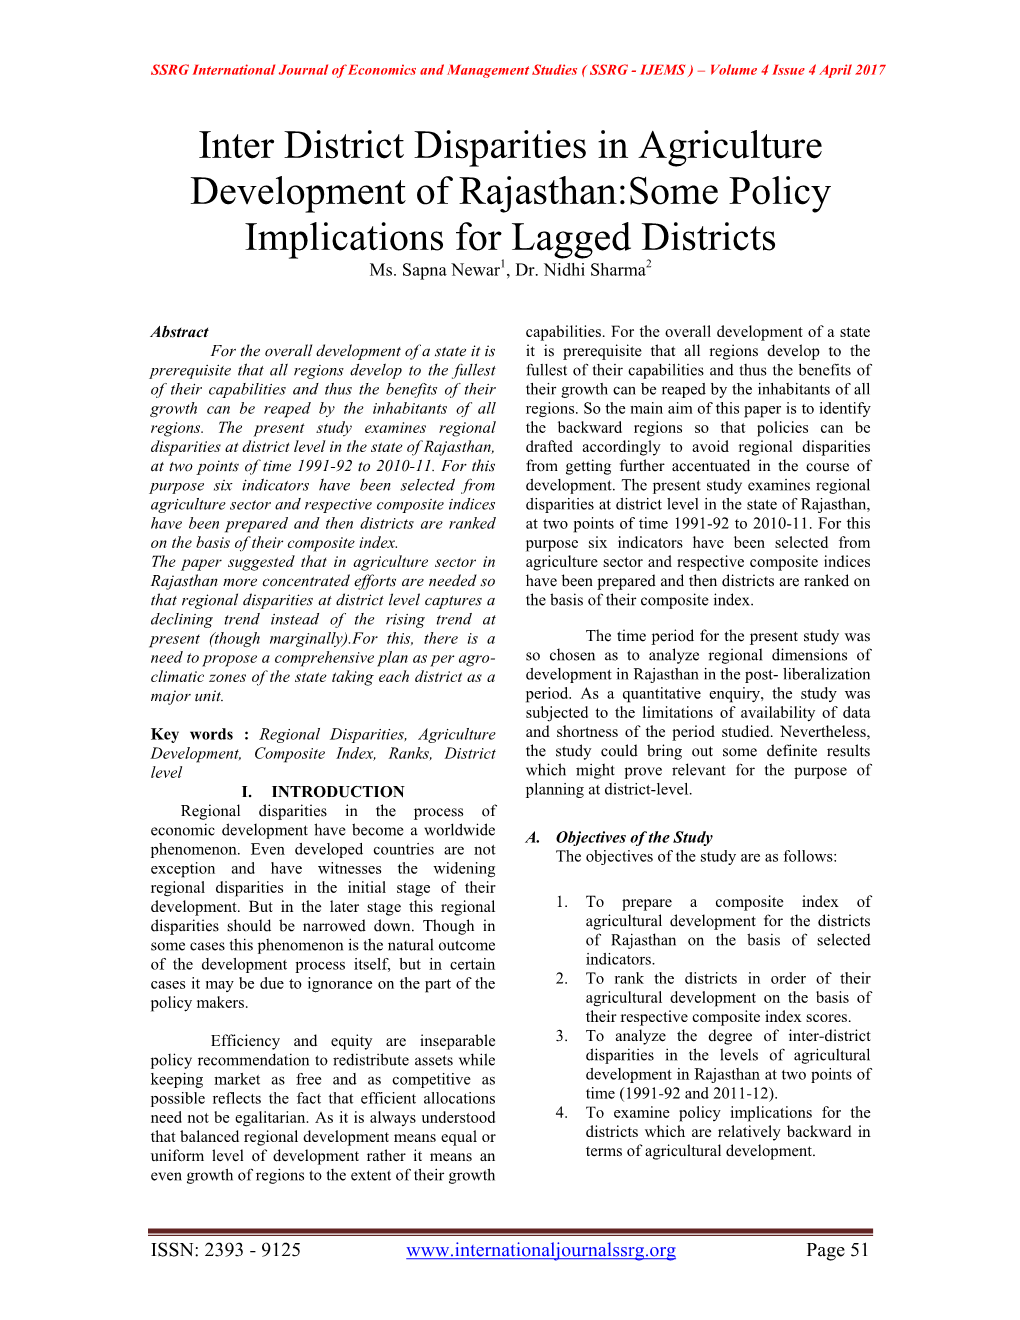 Inter District Disparities in Agriculture Development of Rajasthan:Some Policy Implications for Lagged Districts Ms